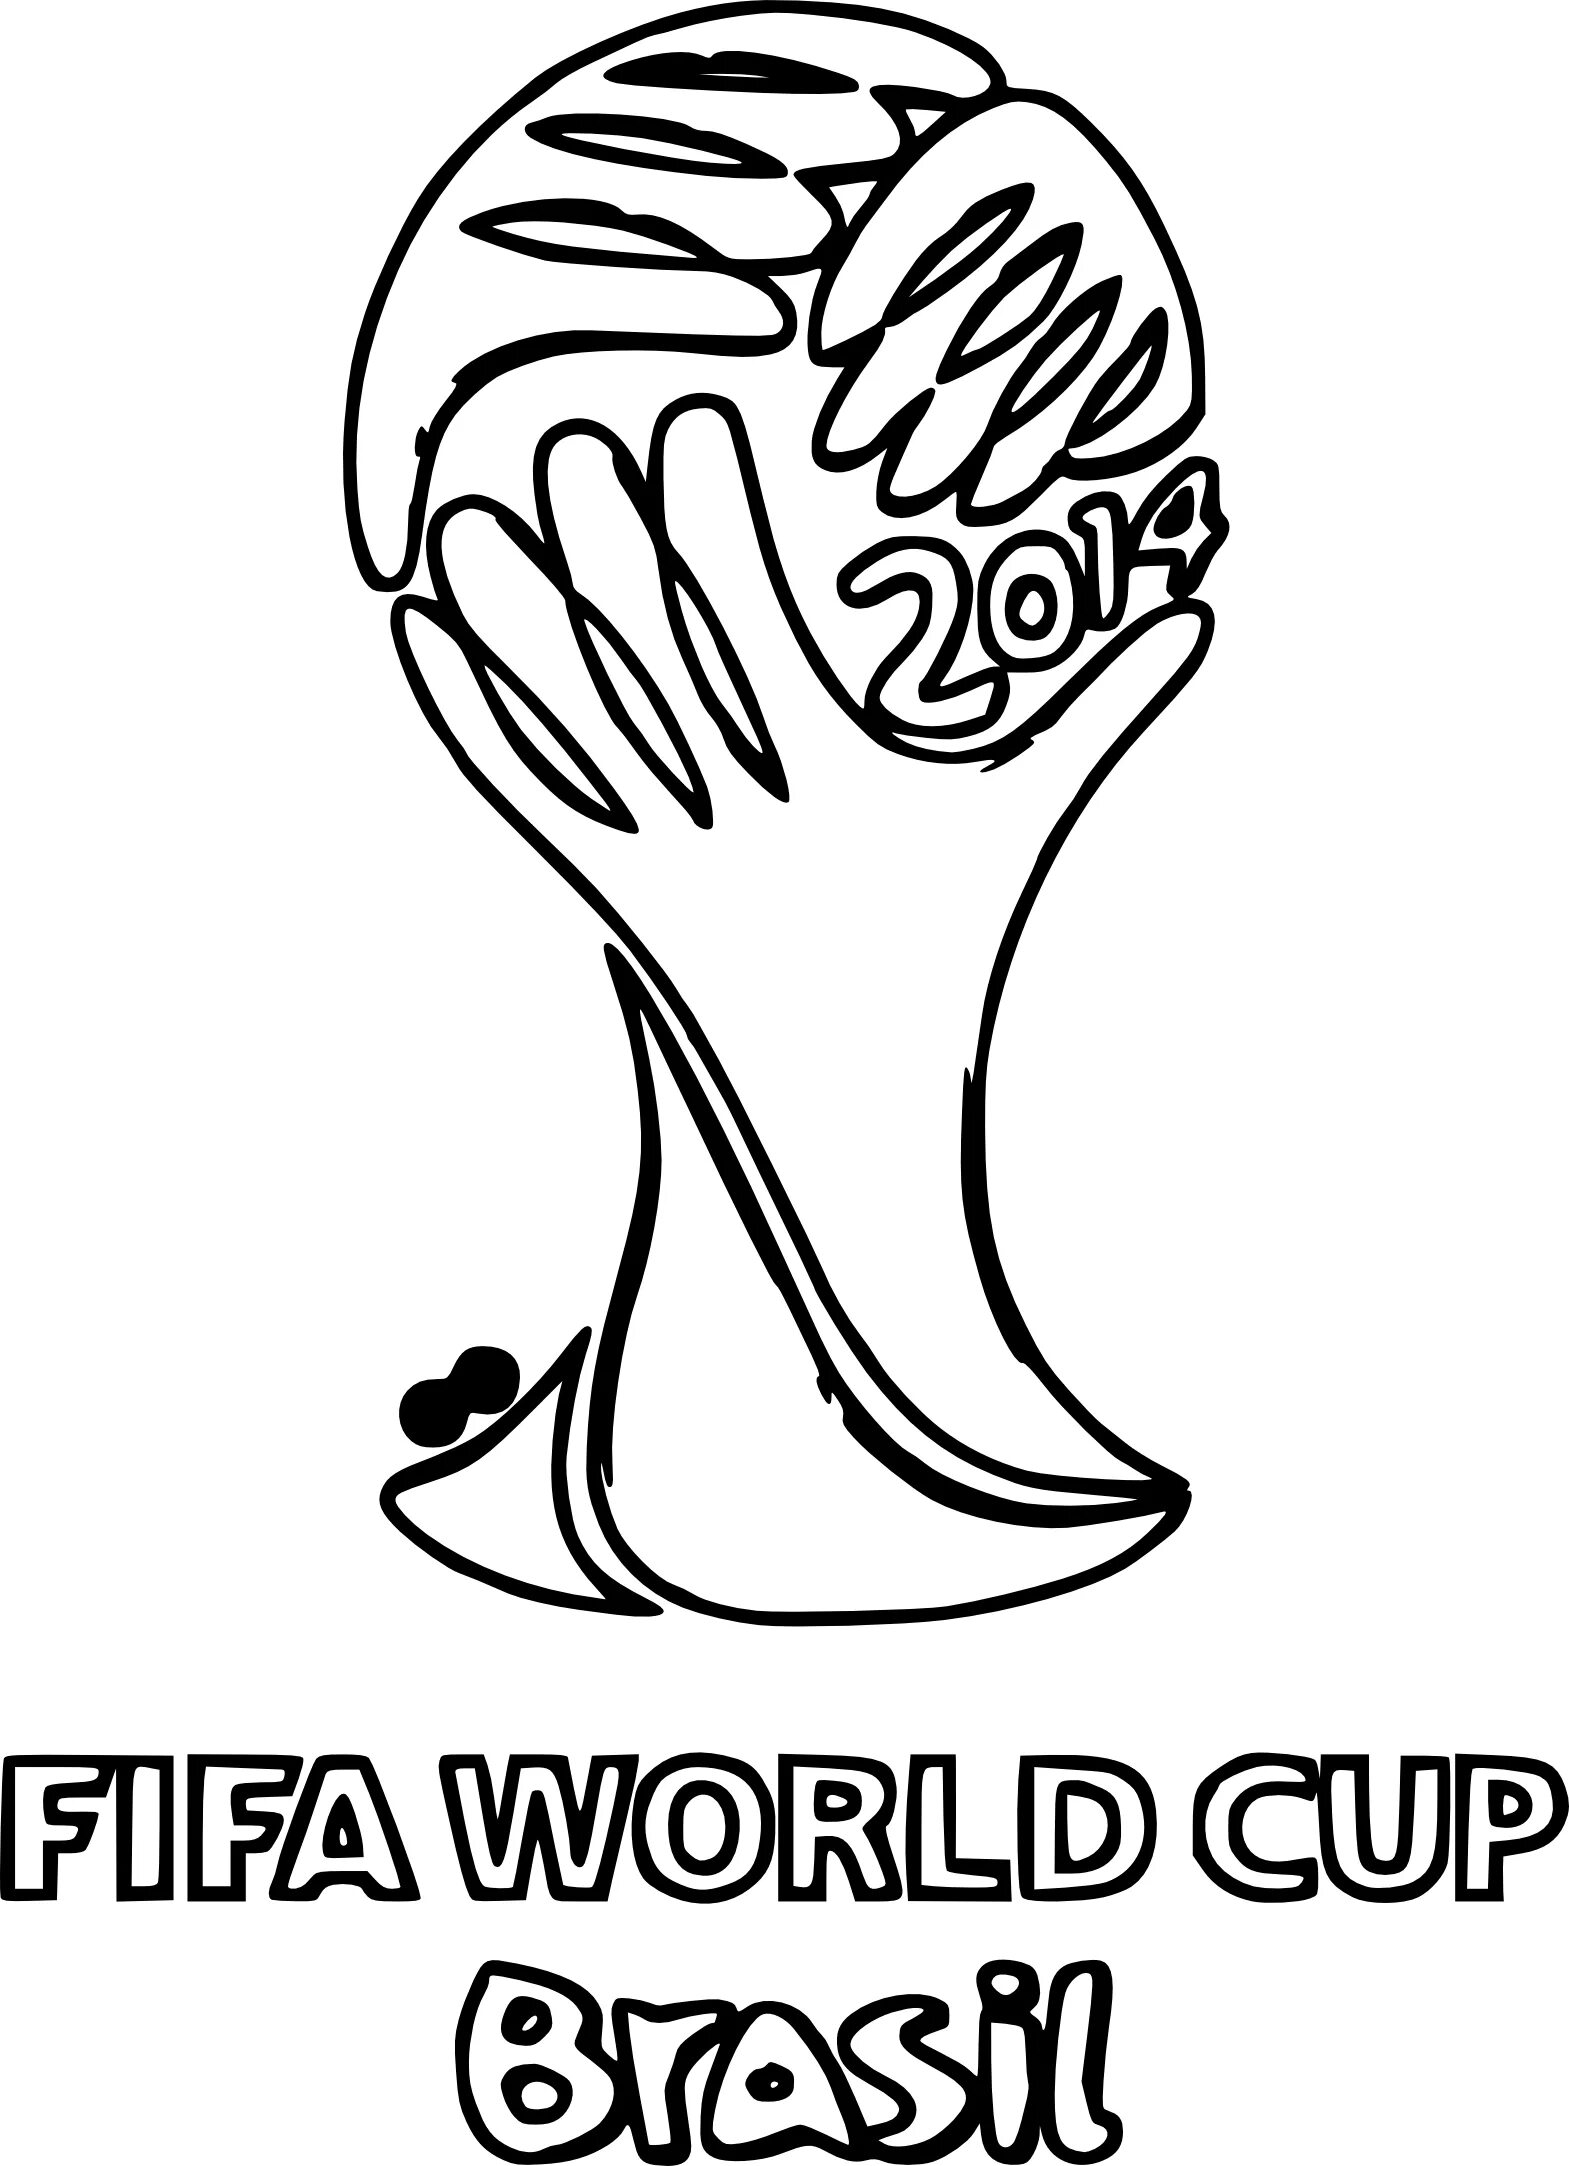 Coloring page of spectacular football cup